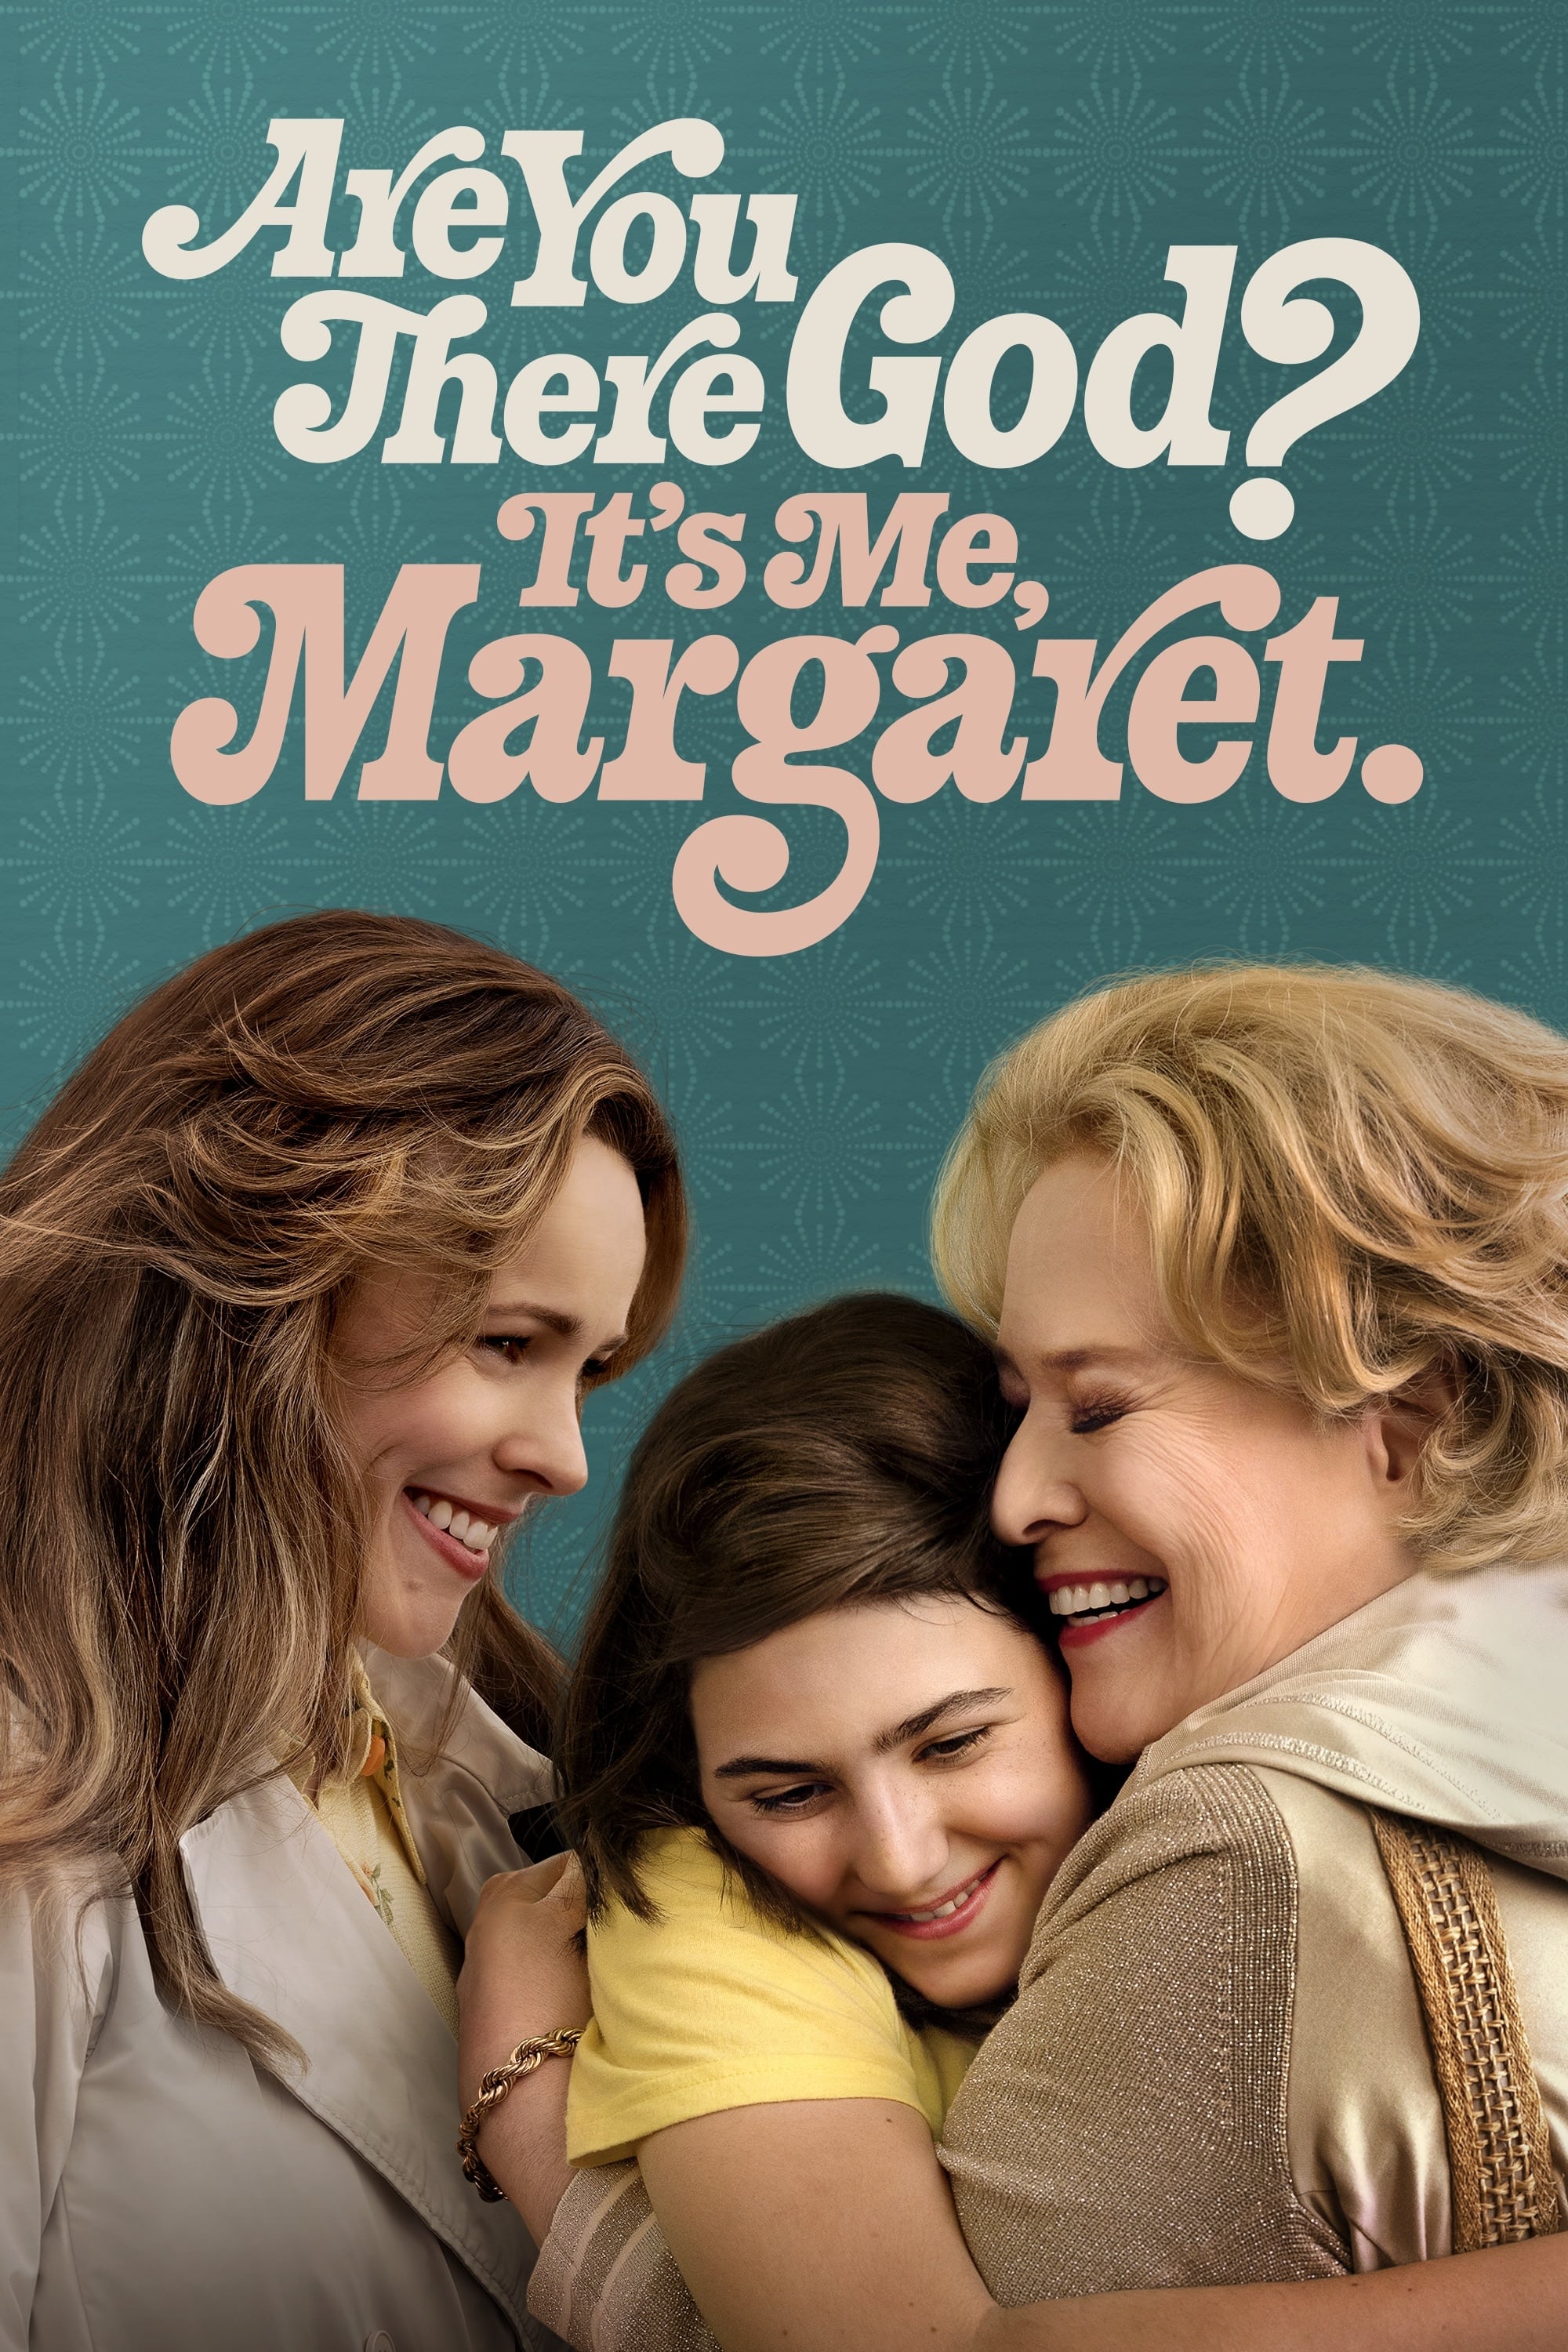 Are You There God? It’s Me, Margaret (2023) HD 1080p Latino